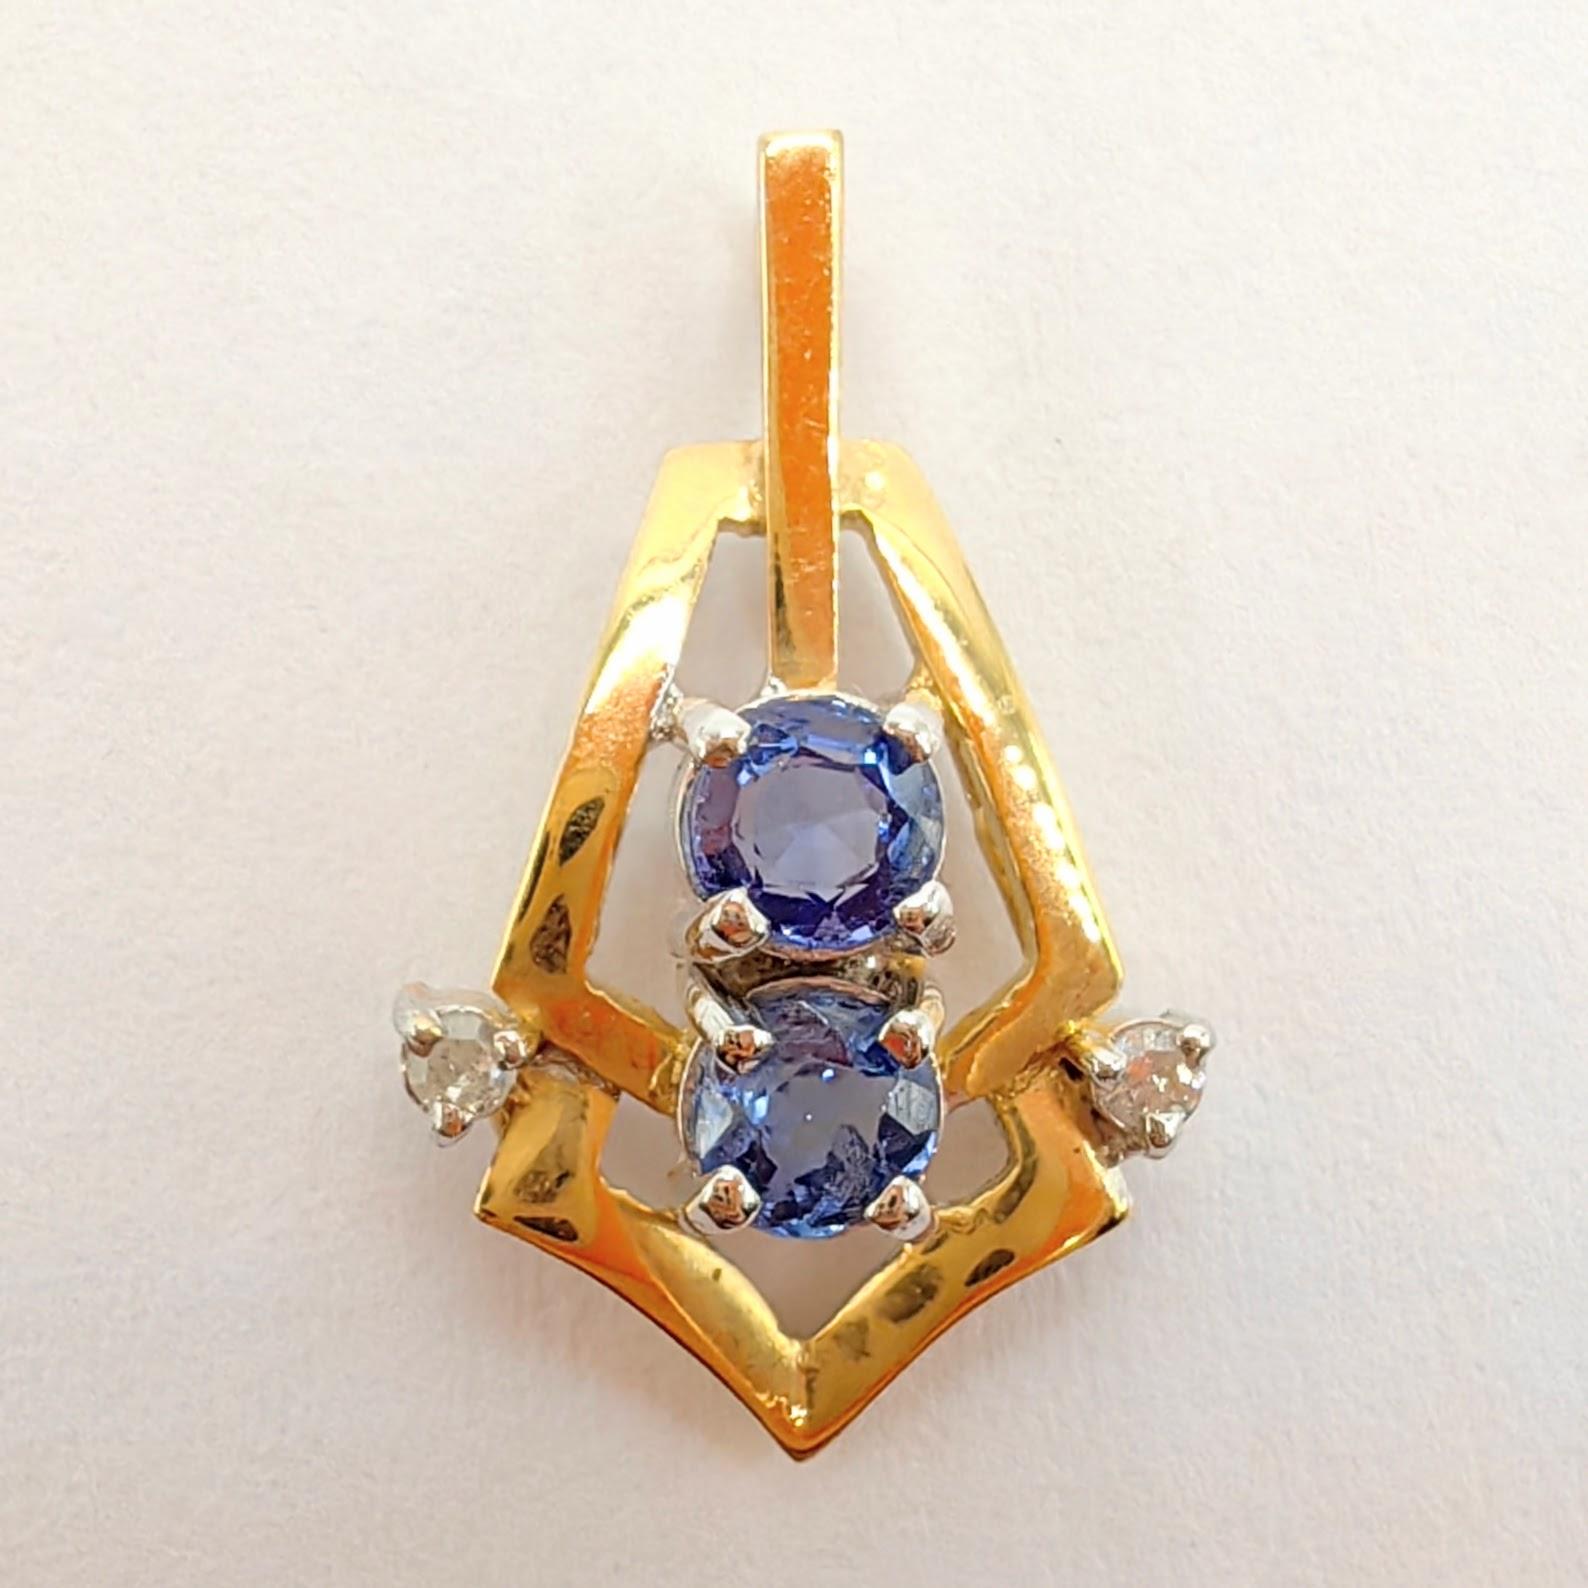 Introducing our Vintage Natural Pastel Blue Sapphire Diamond Necklace Pendant in 14K Yellow Gold, a delicate and captivating piece that combines vintage charm with the soft allure of pastel blue gemstones.

This pendant features two natural